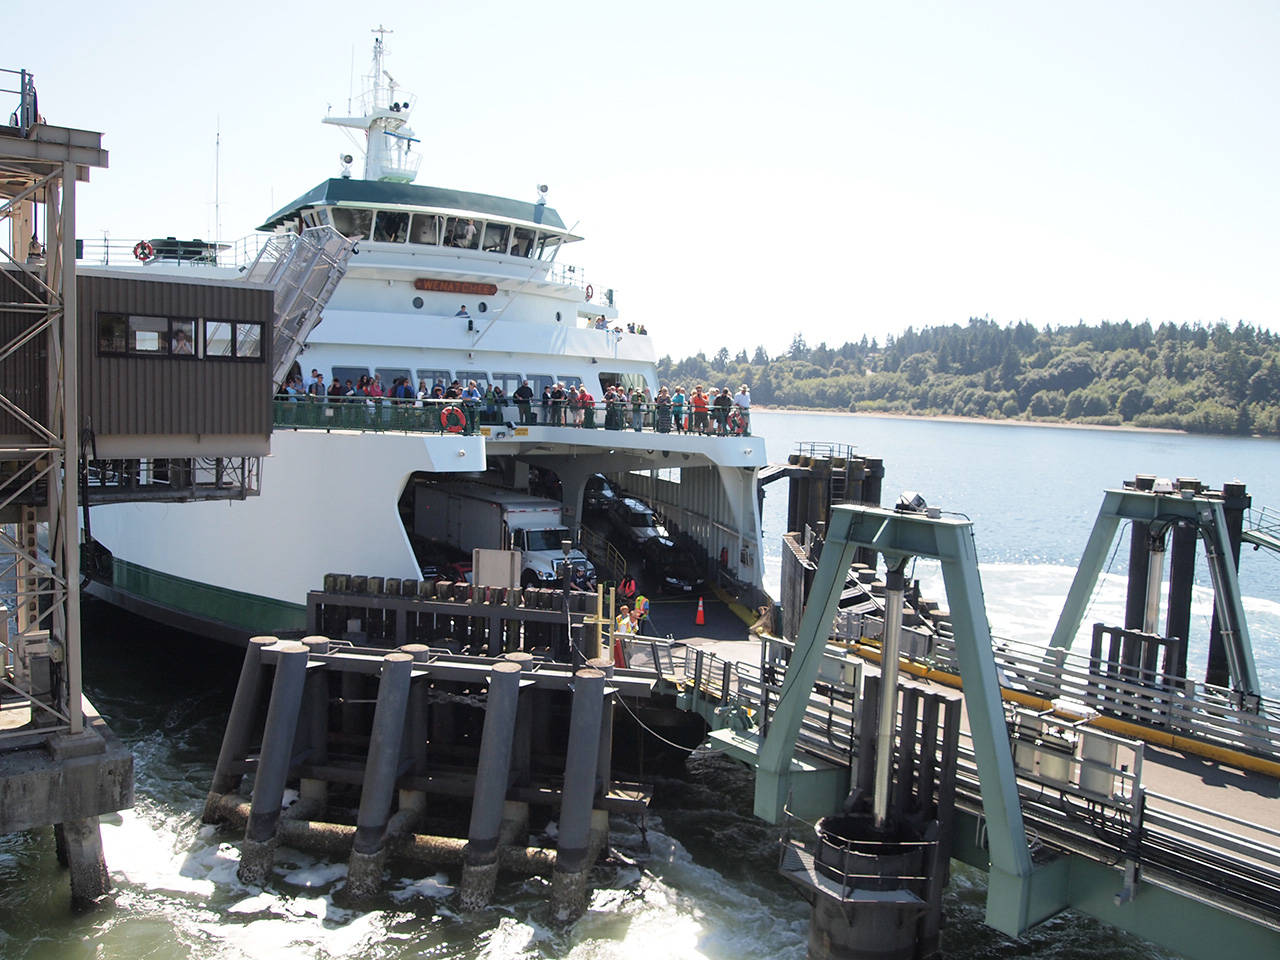 Half million riders expected on state ferries for the Fourth